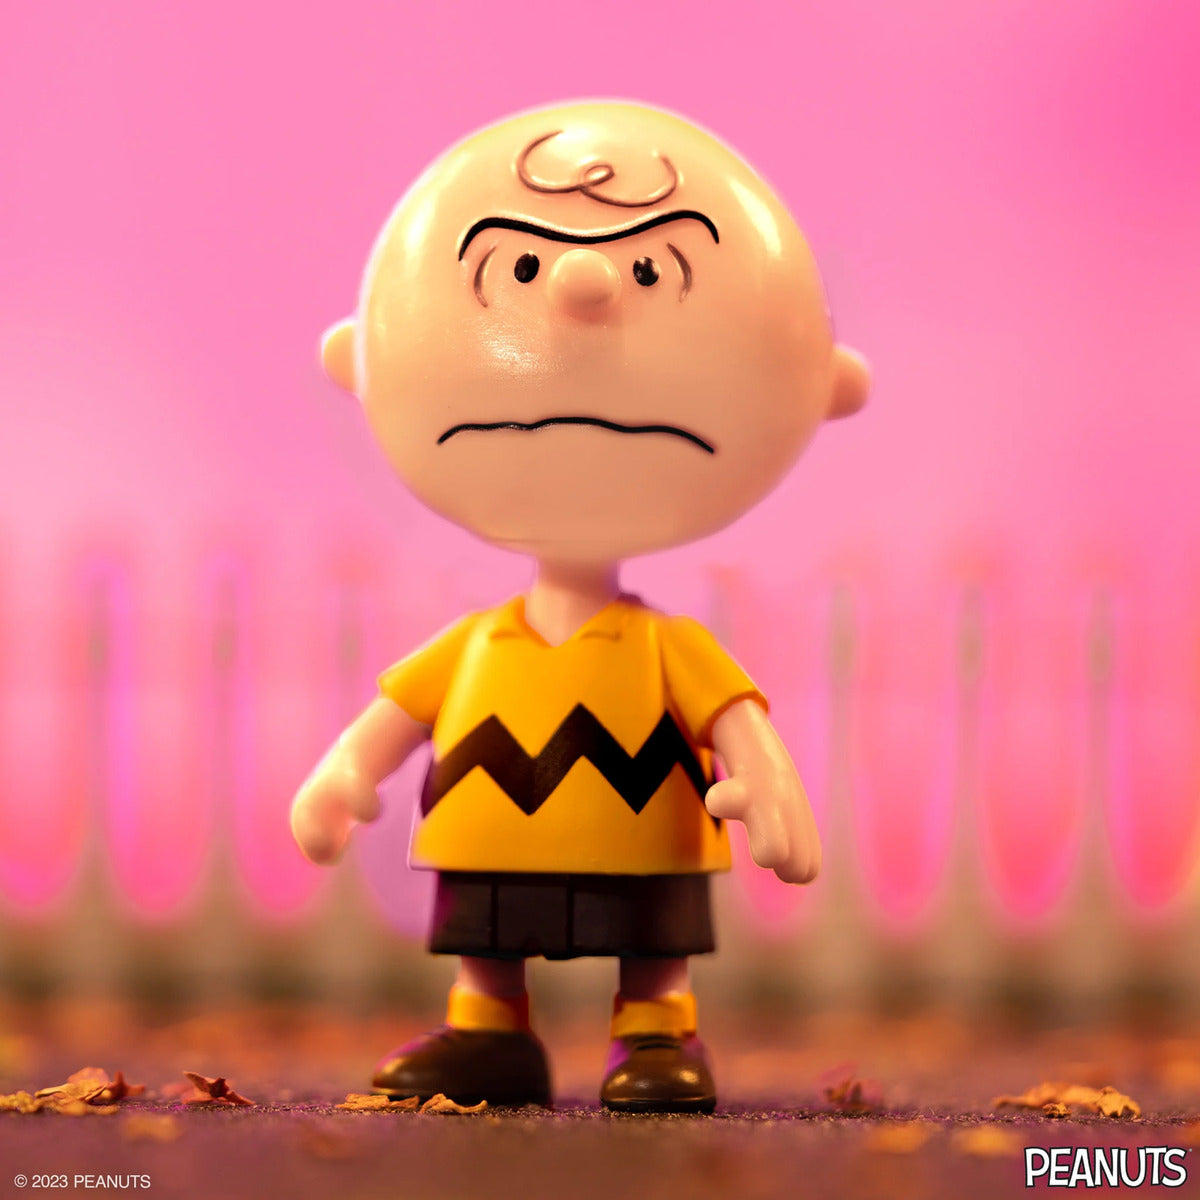 Peanuts ReAction "I Hate Valentine's Day" Charlie Brown Figure - Peanuts by Super7